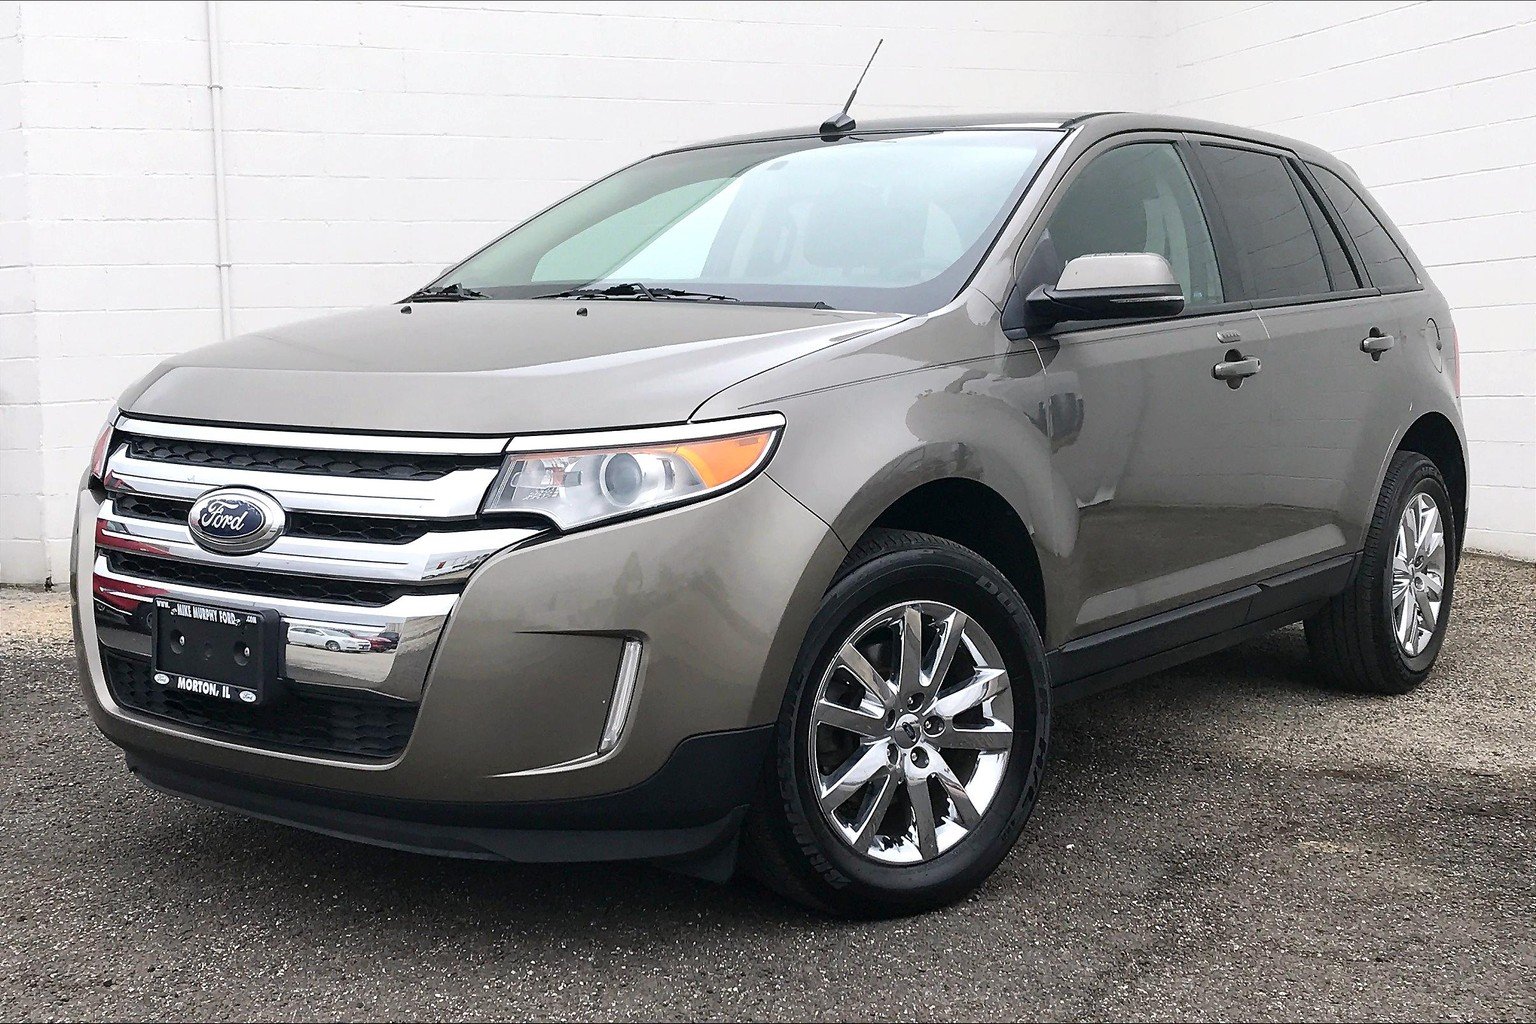 Pre-Owned 2013 Ford Edge 4dr SEL FWD 4D Sport Utility in Morton #B36552